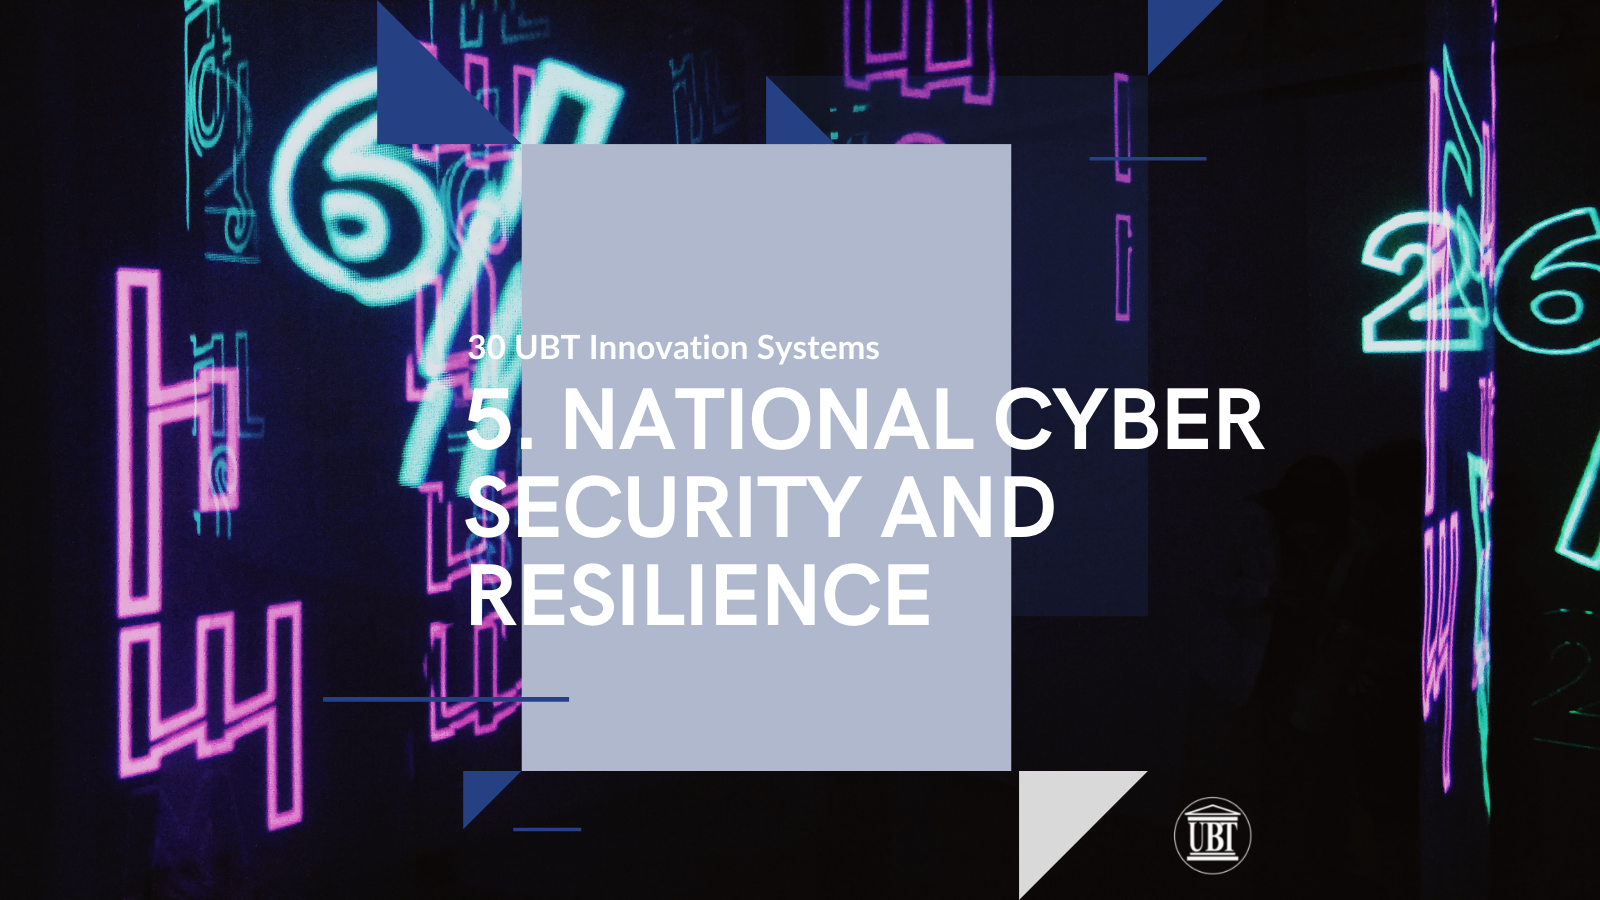 NATIONAL CYBER SECURITY AND RESILIENCE – UBT INNOVATIONS